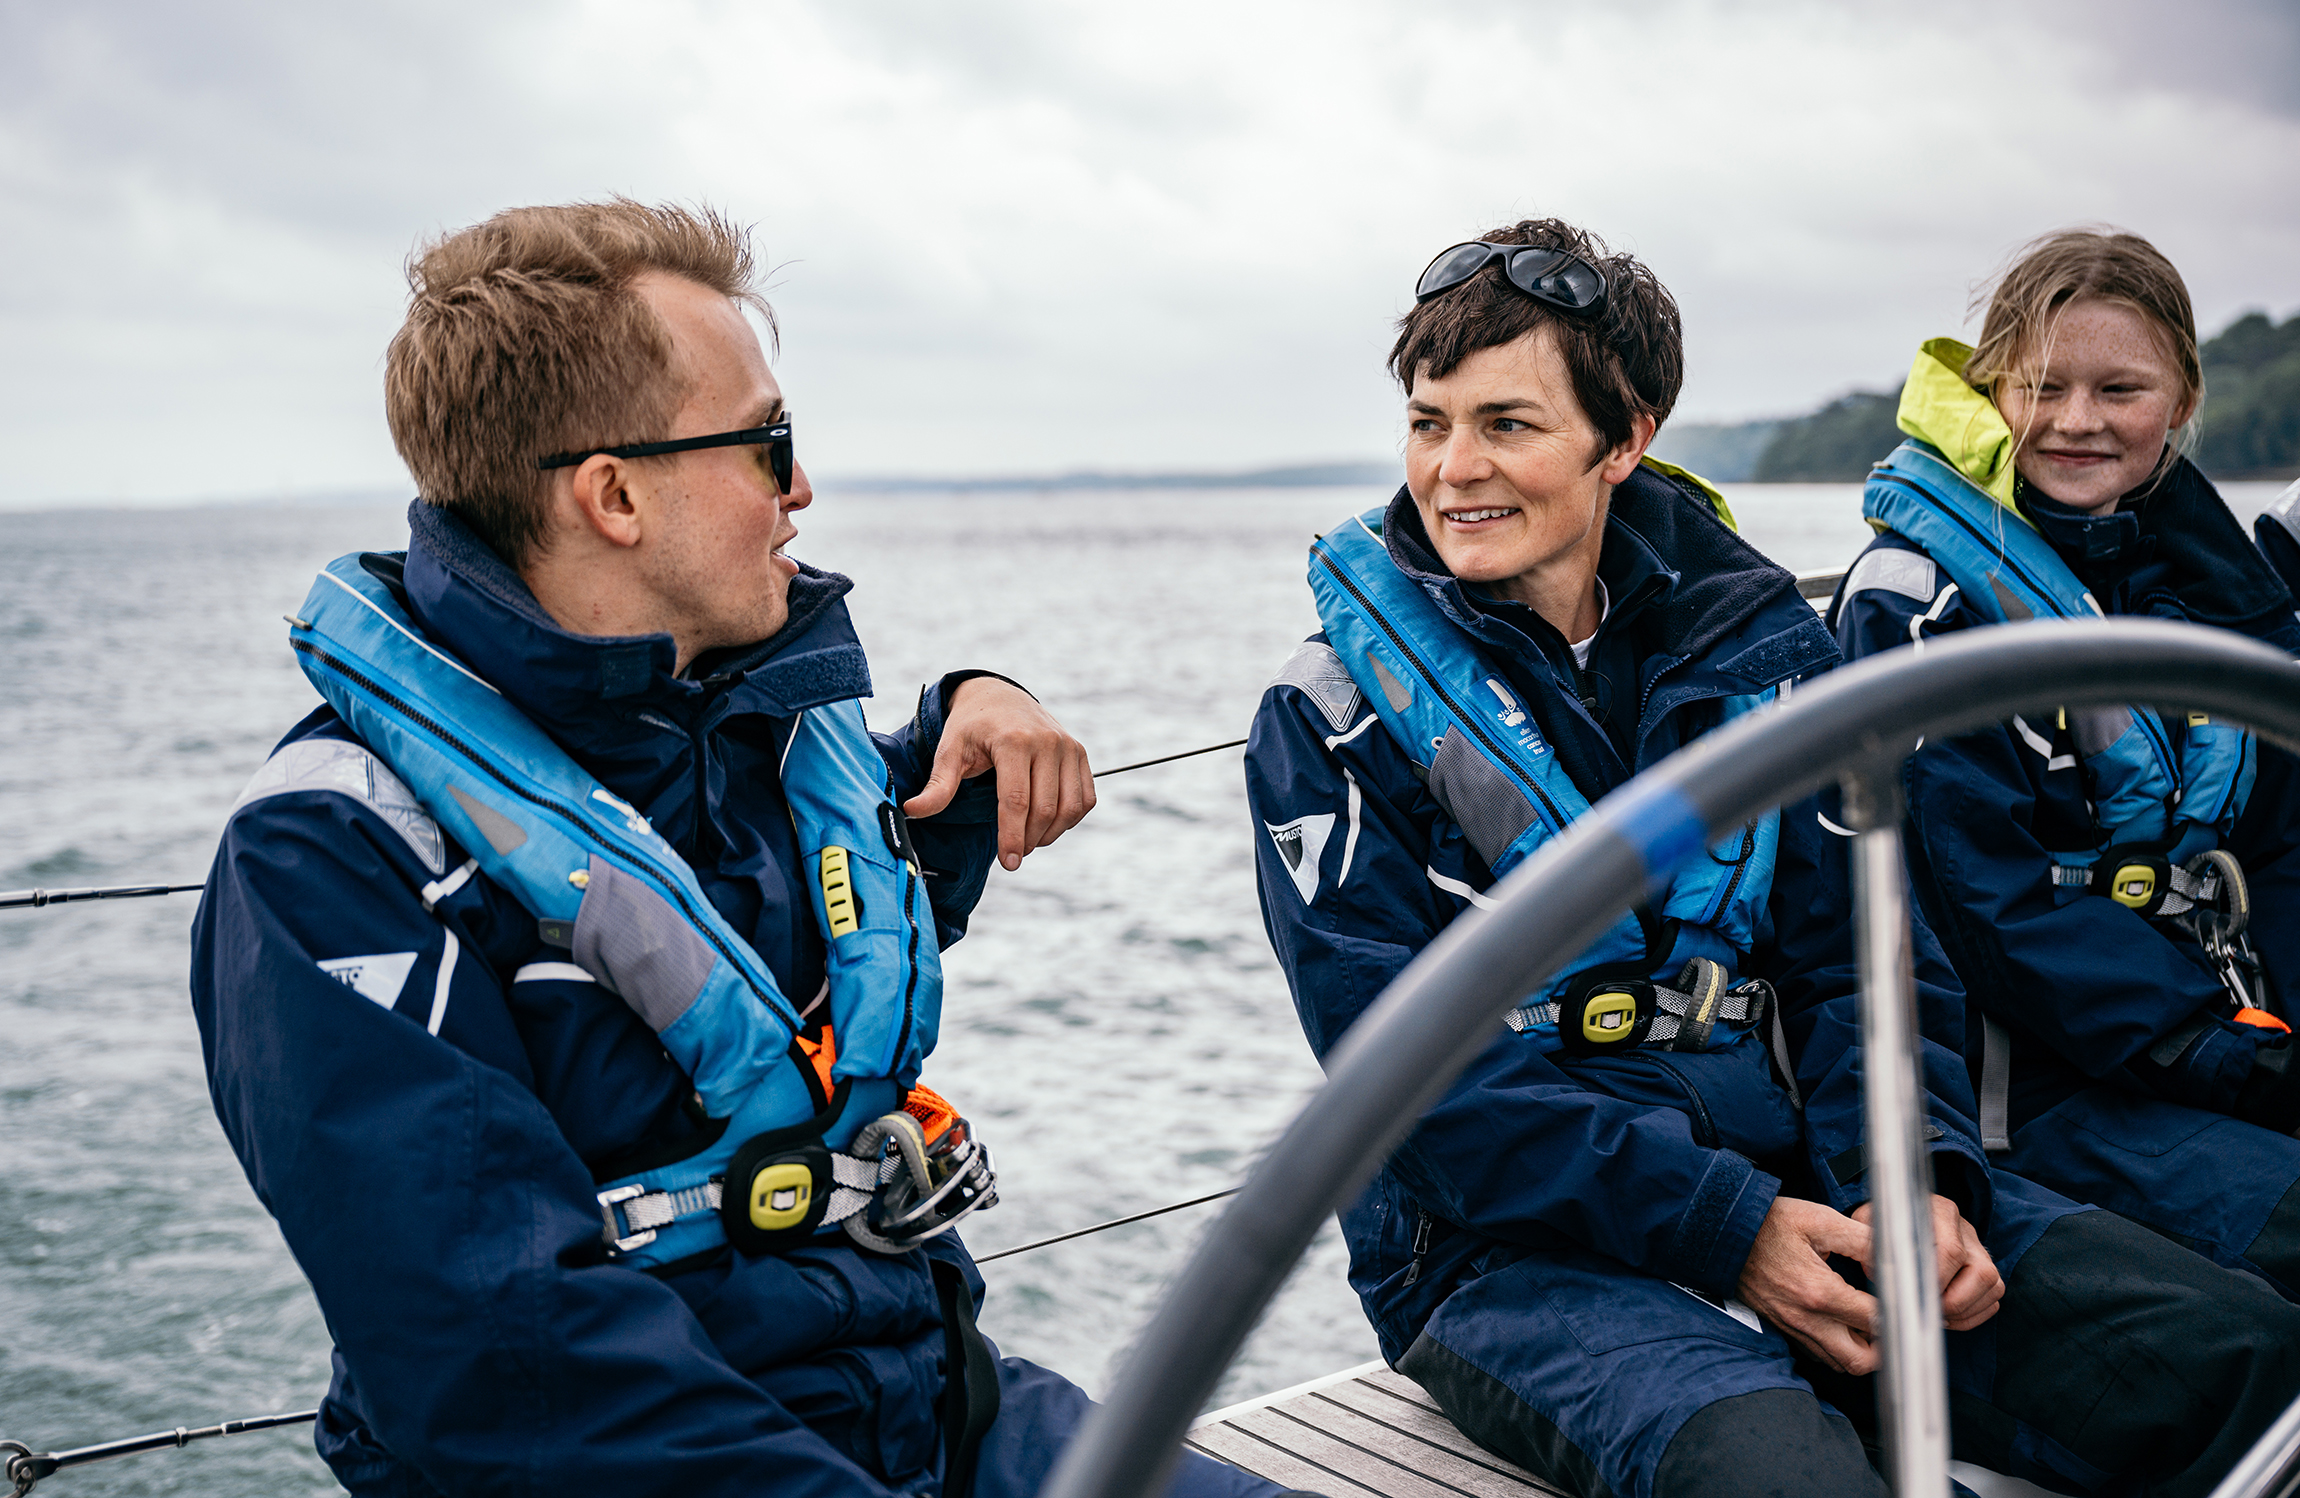 Josh chatting to Ellen MacArthur as part of her crew during Round the Island Race